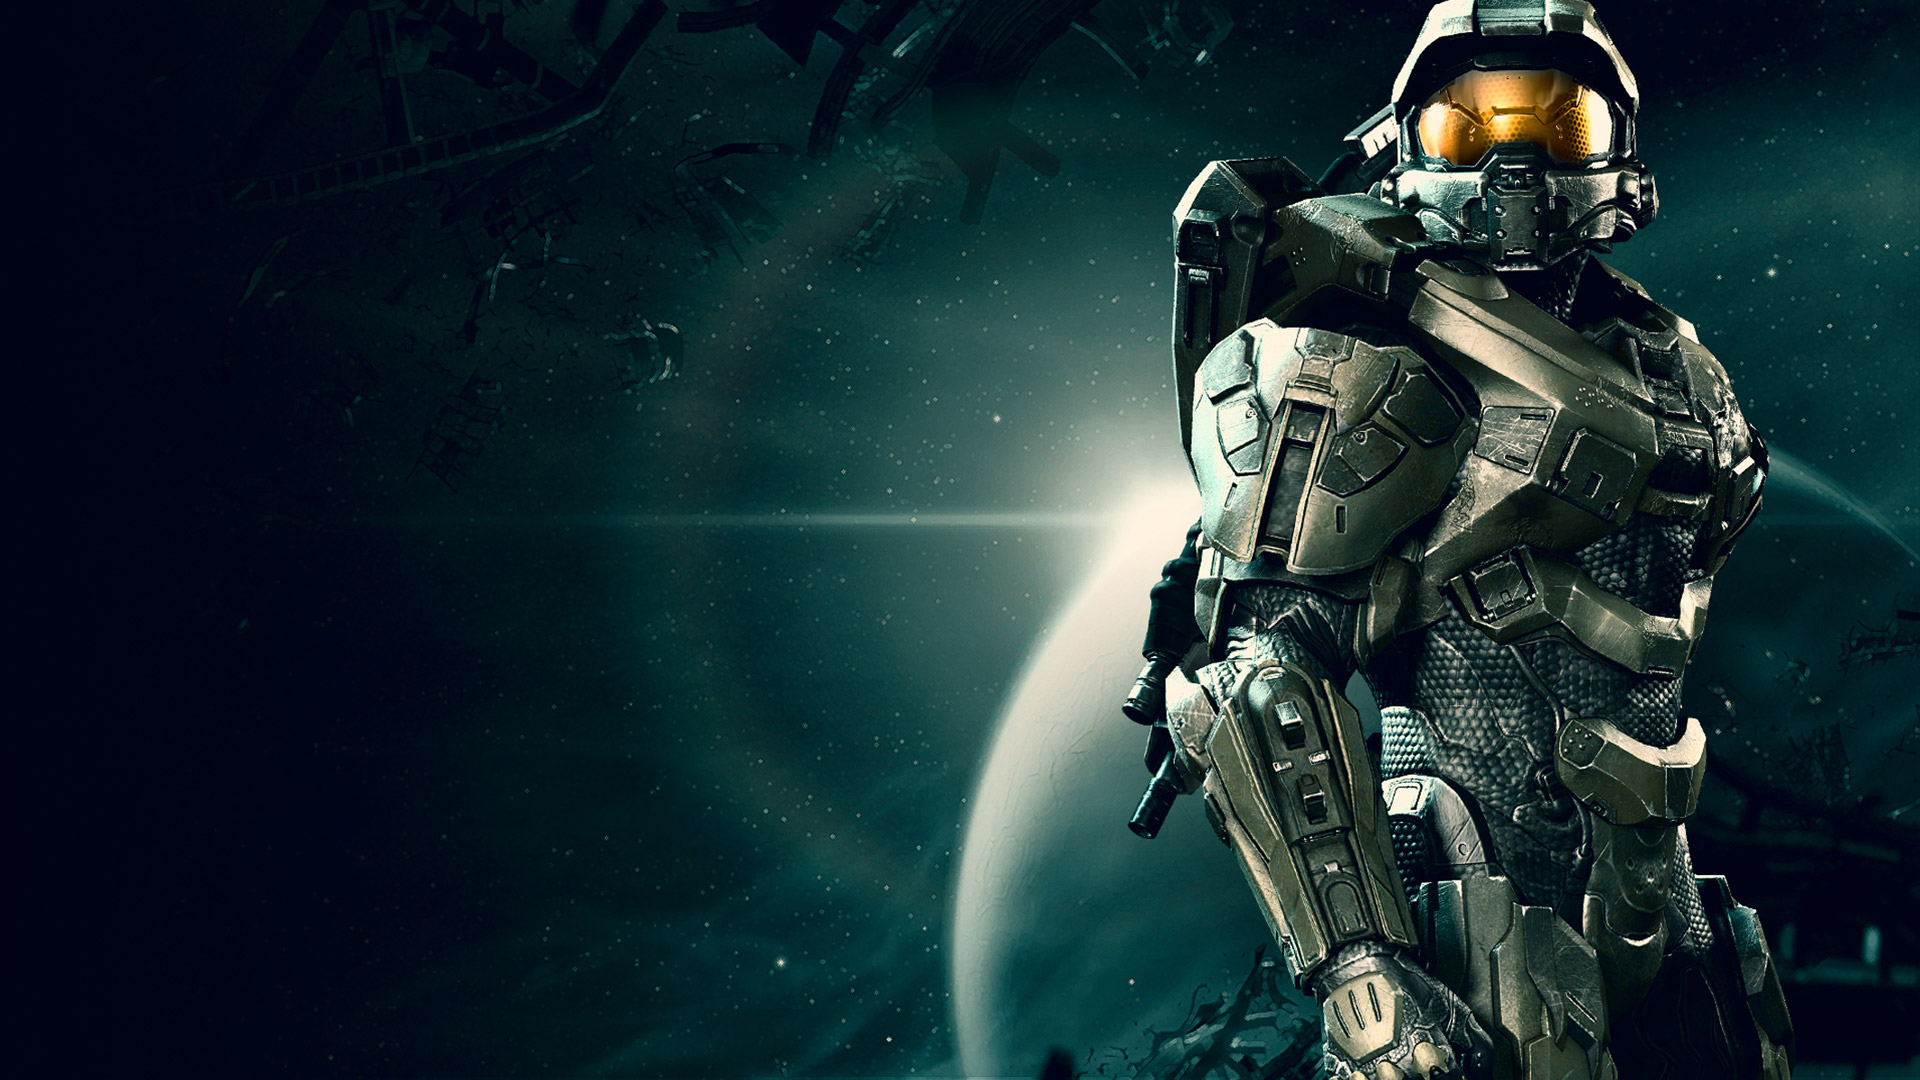 halo-the-master-chief-collection-2014